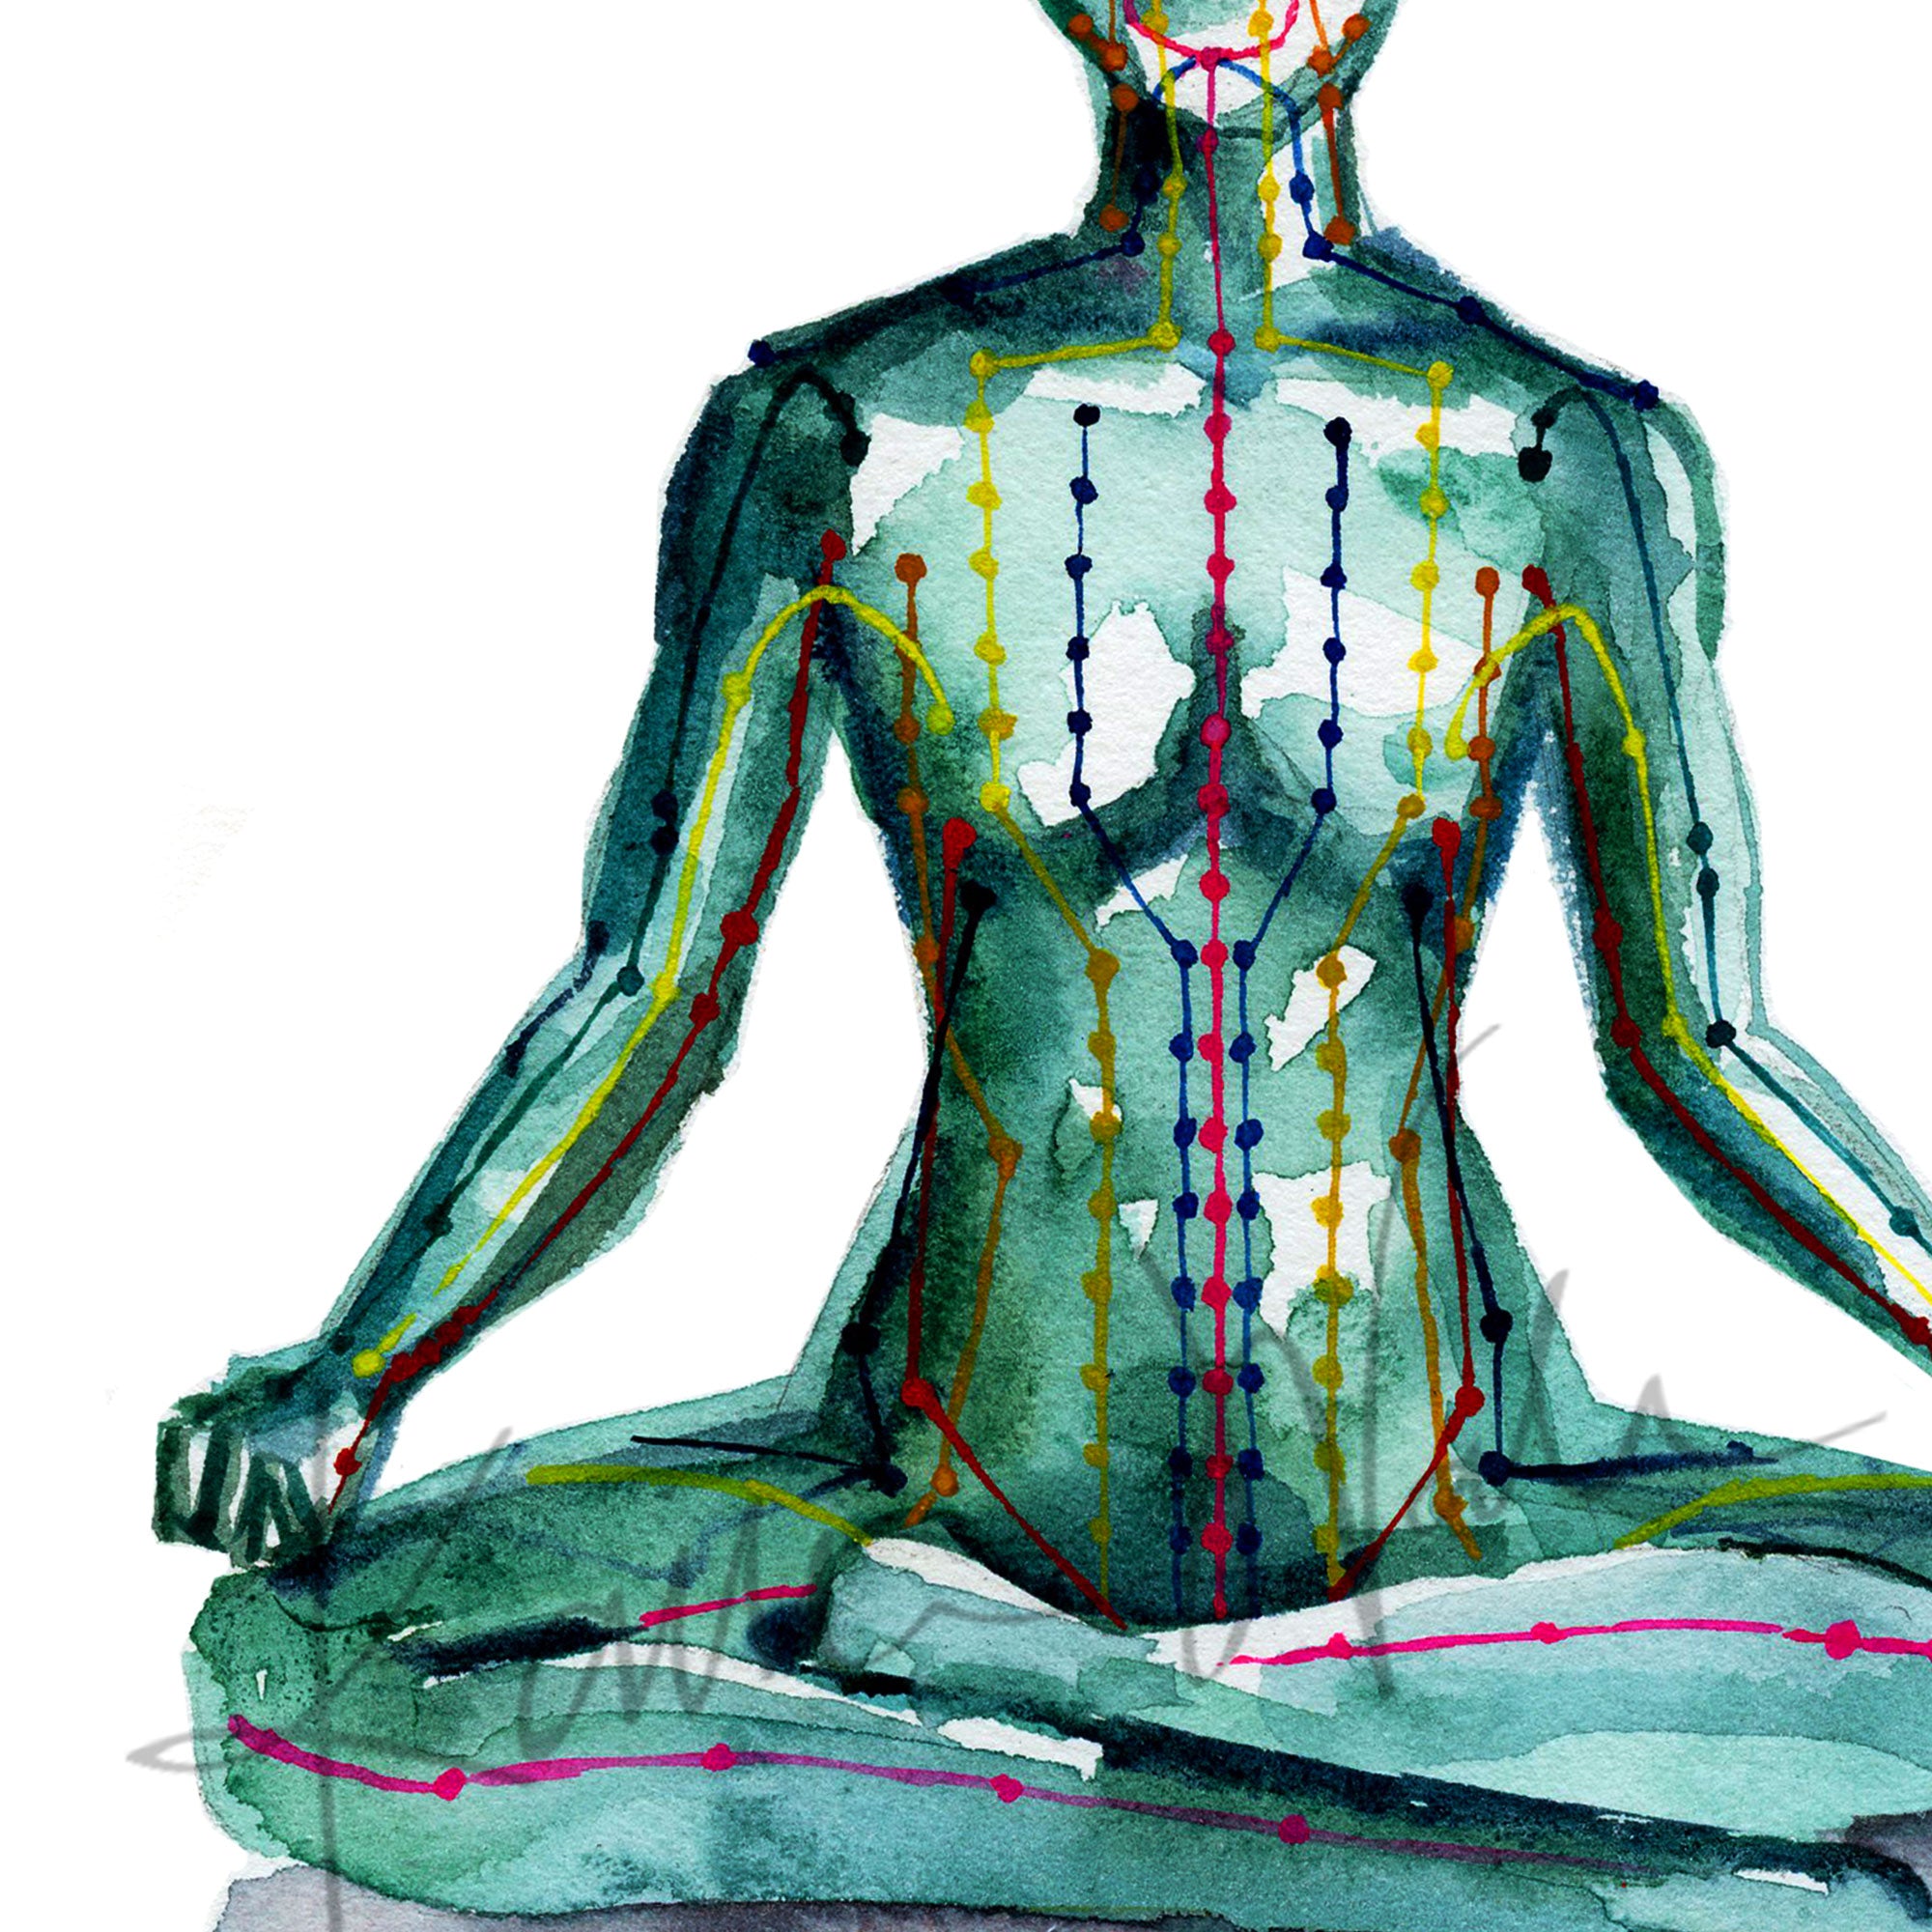 Zoomed in view of a watercolor painting of a person sitting in a meditative pose with meridian paths showing.